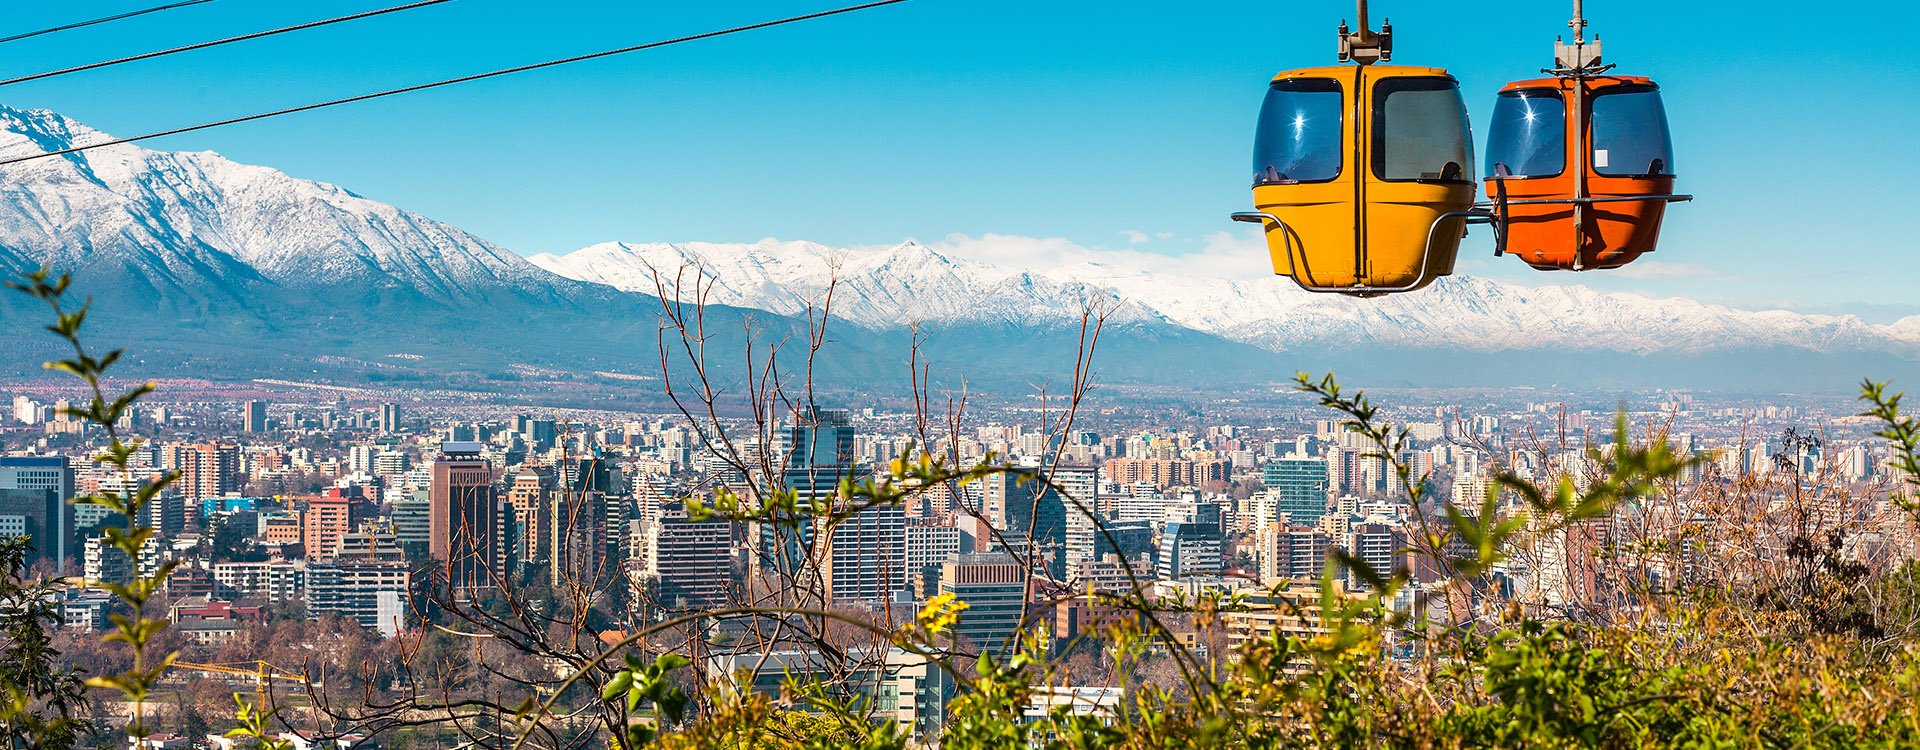 Cable car in San Cristobal hill, panoramic view of Santiago de Chile